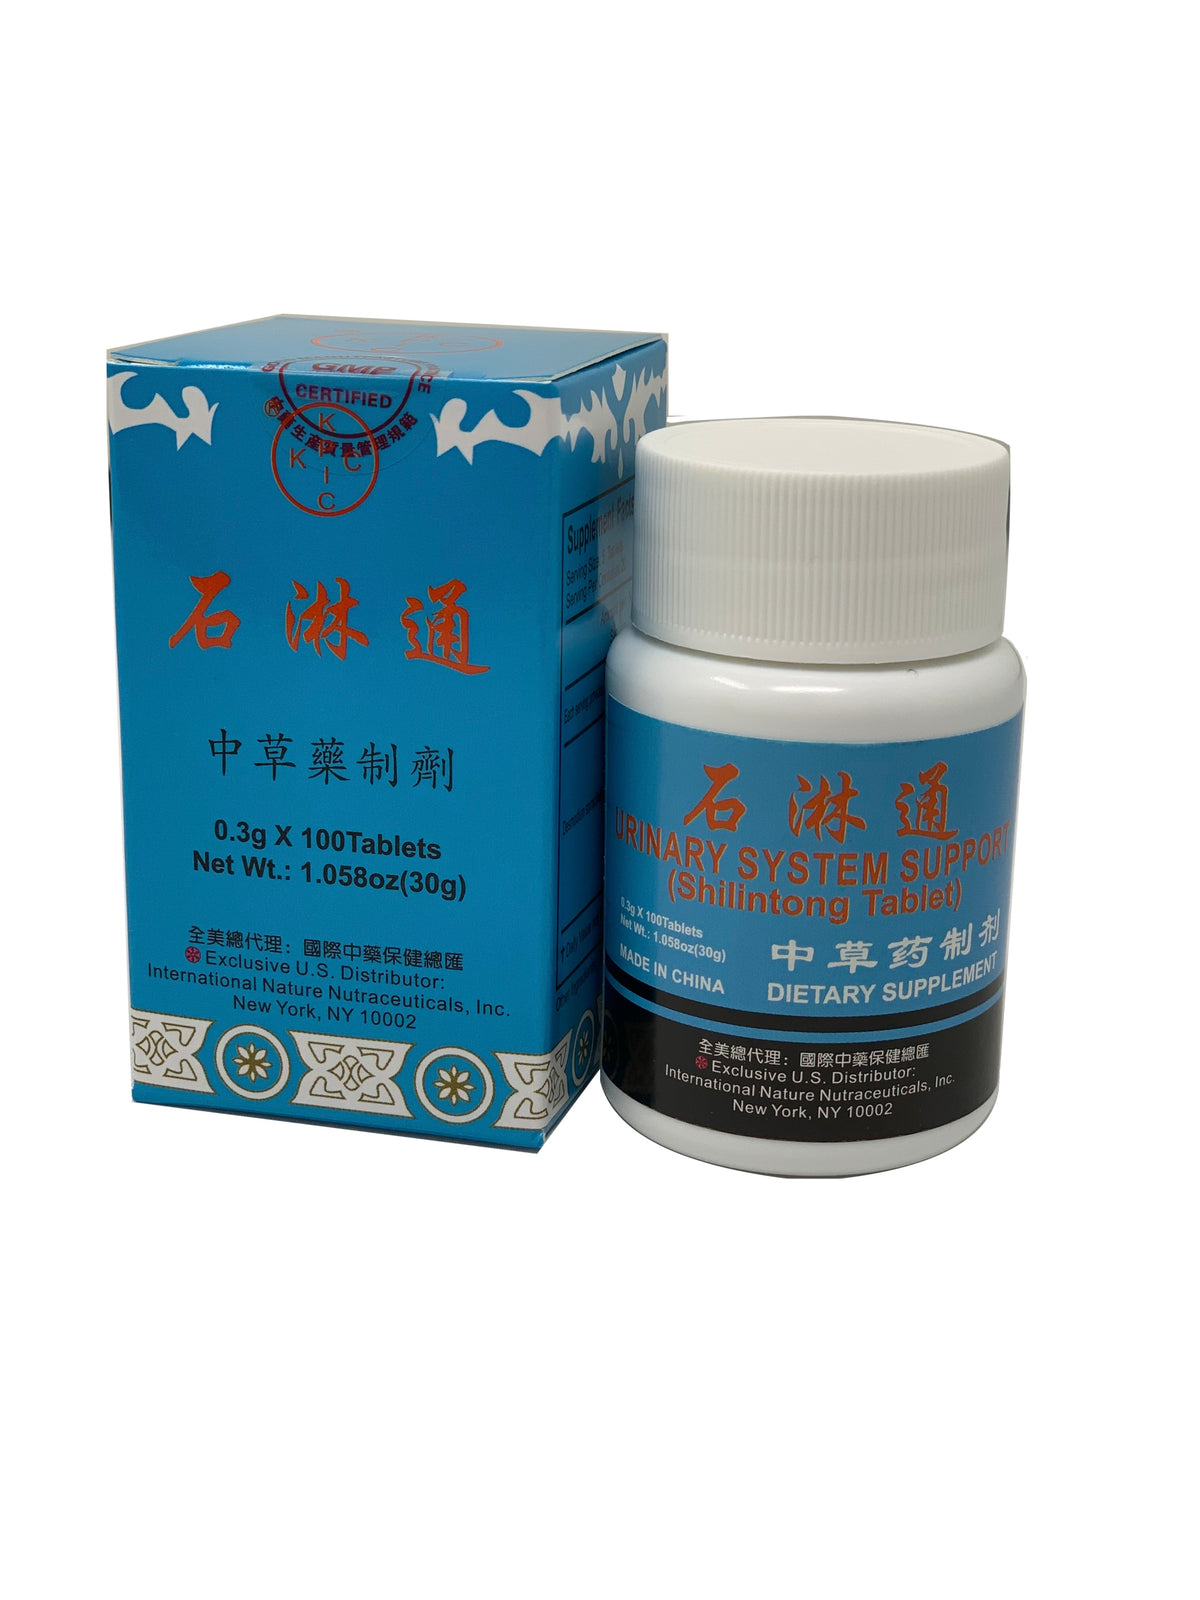 Urinary System Support (Shilintong Tablet)